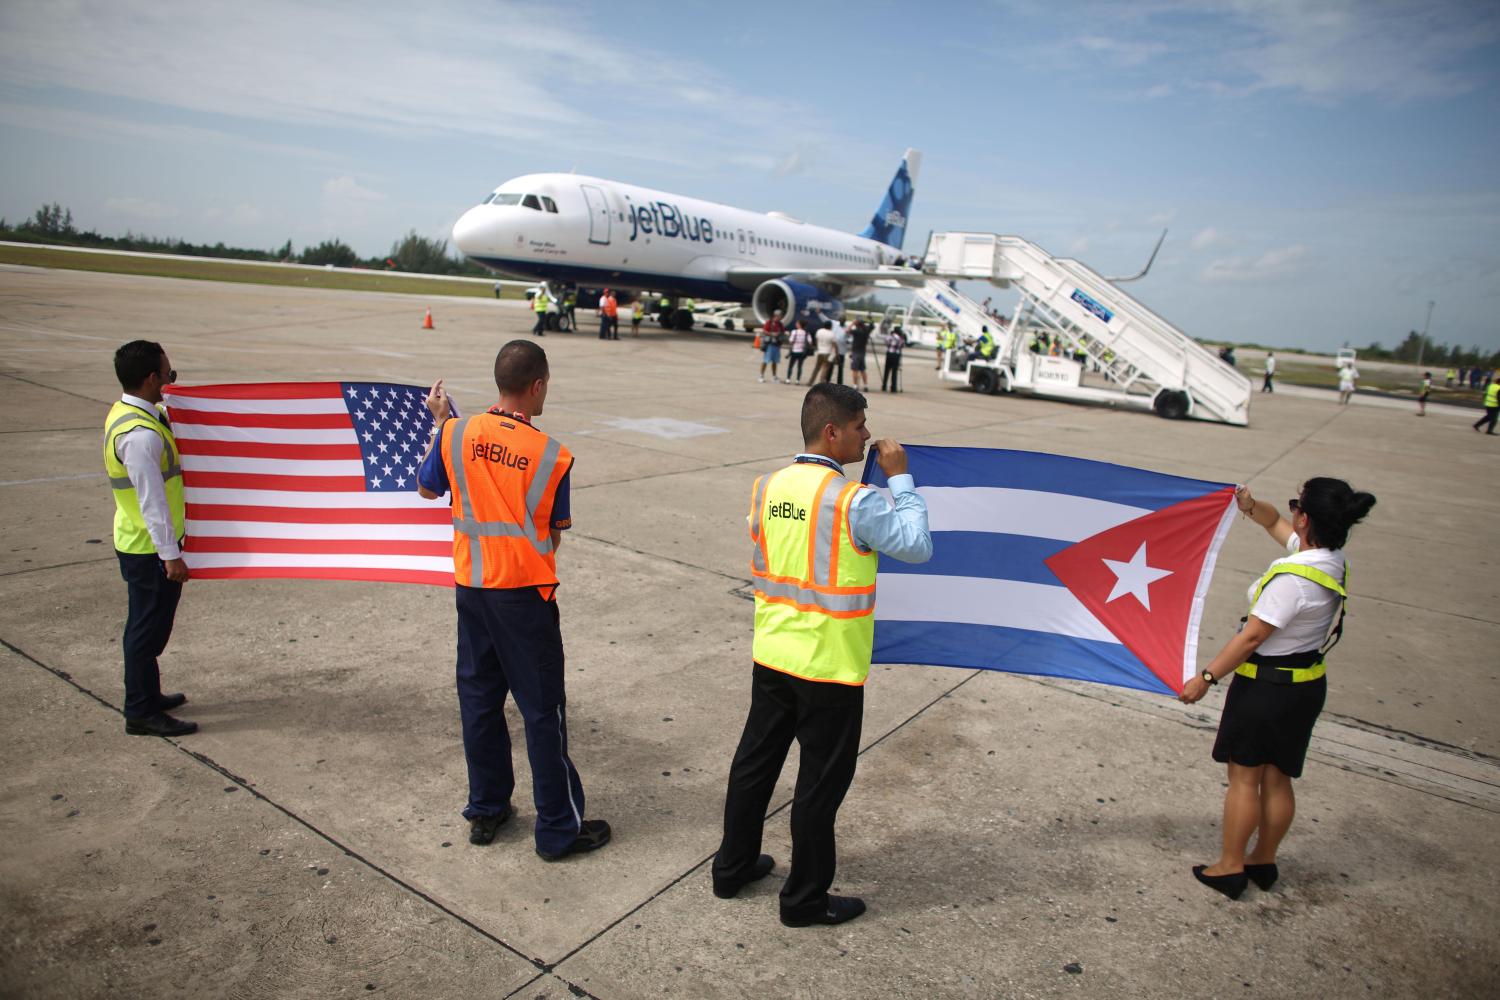 Ground crew hold U.S. and Cuban flags near a recently landed JetBlue aeroplane, the first commercial scheduled flight between the United States and Cuba in more than 50 years, at the Abel Santamaria International Airport in Santa Clara, Cuba, August 31, 2016. REUTERS/Alexandre Meneghini - RTX2NQET